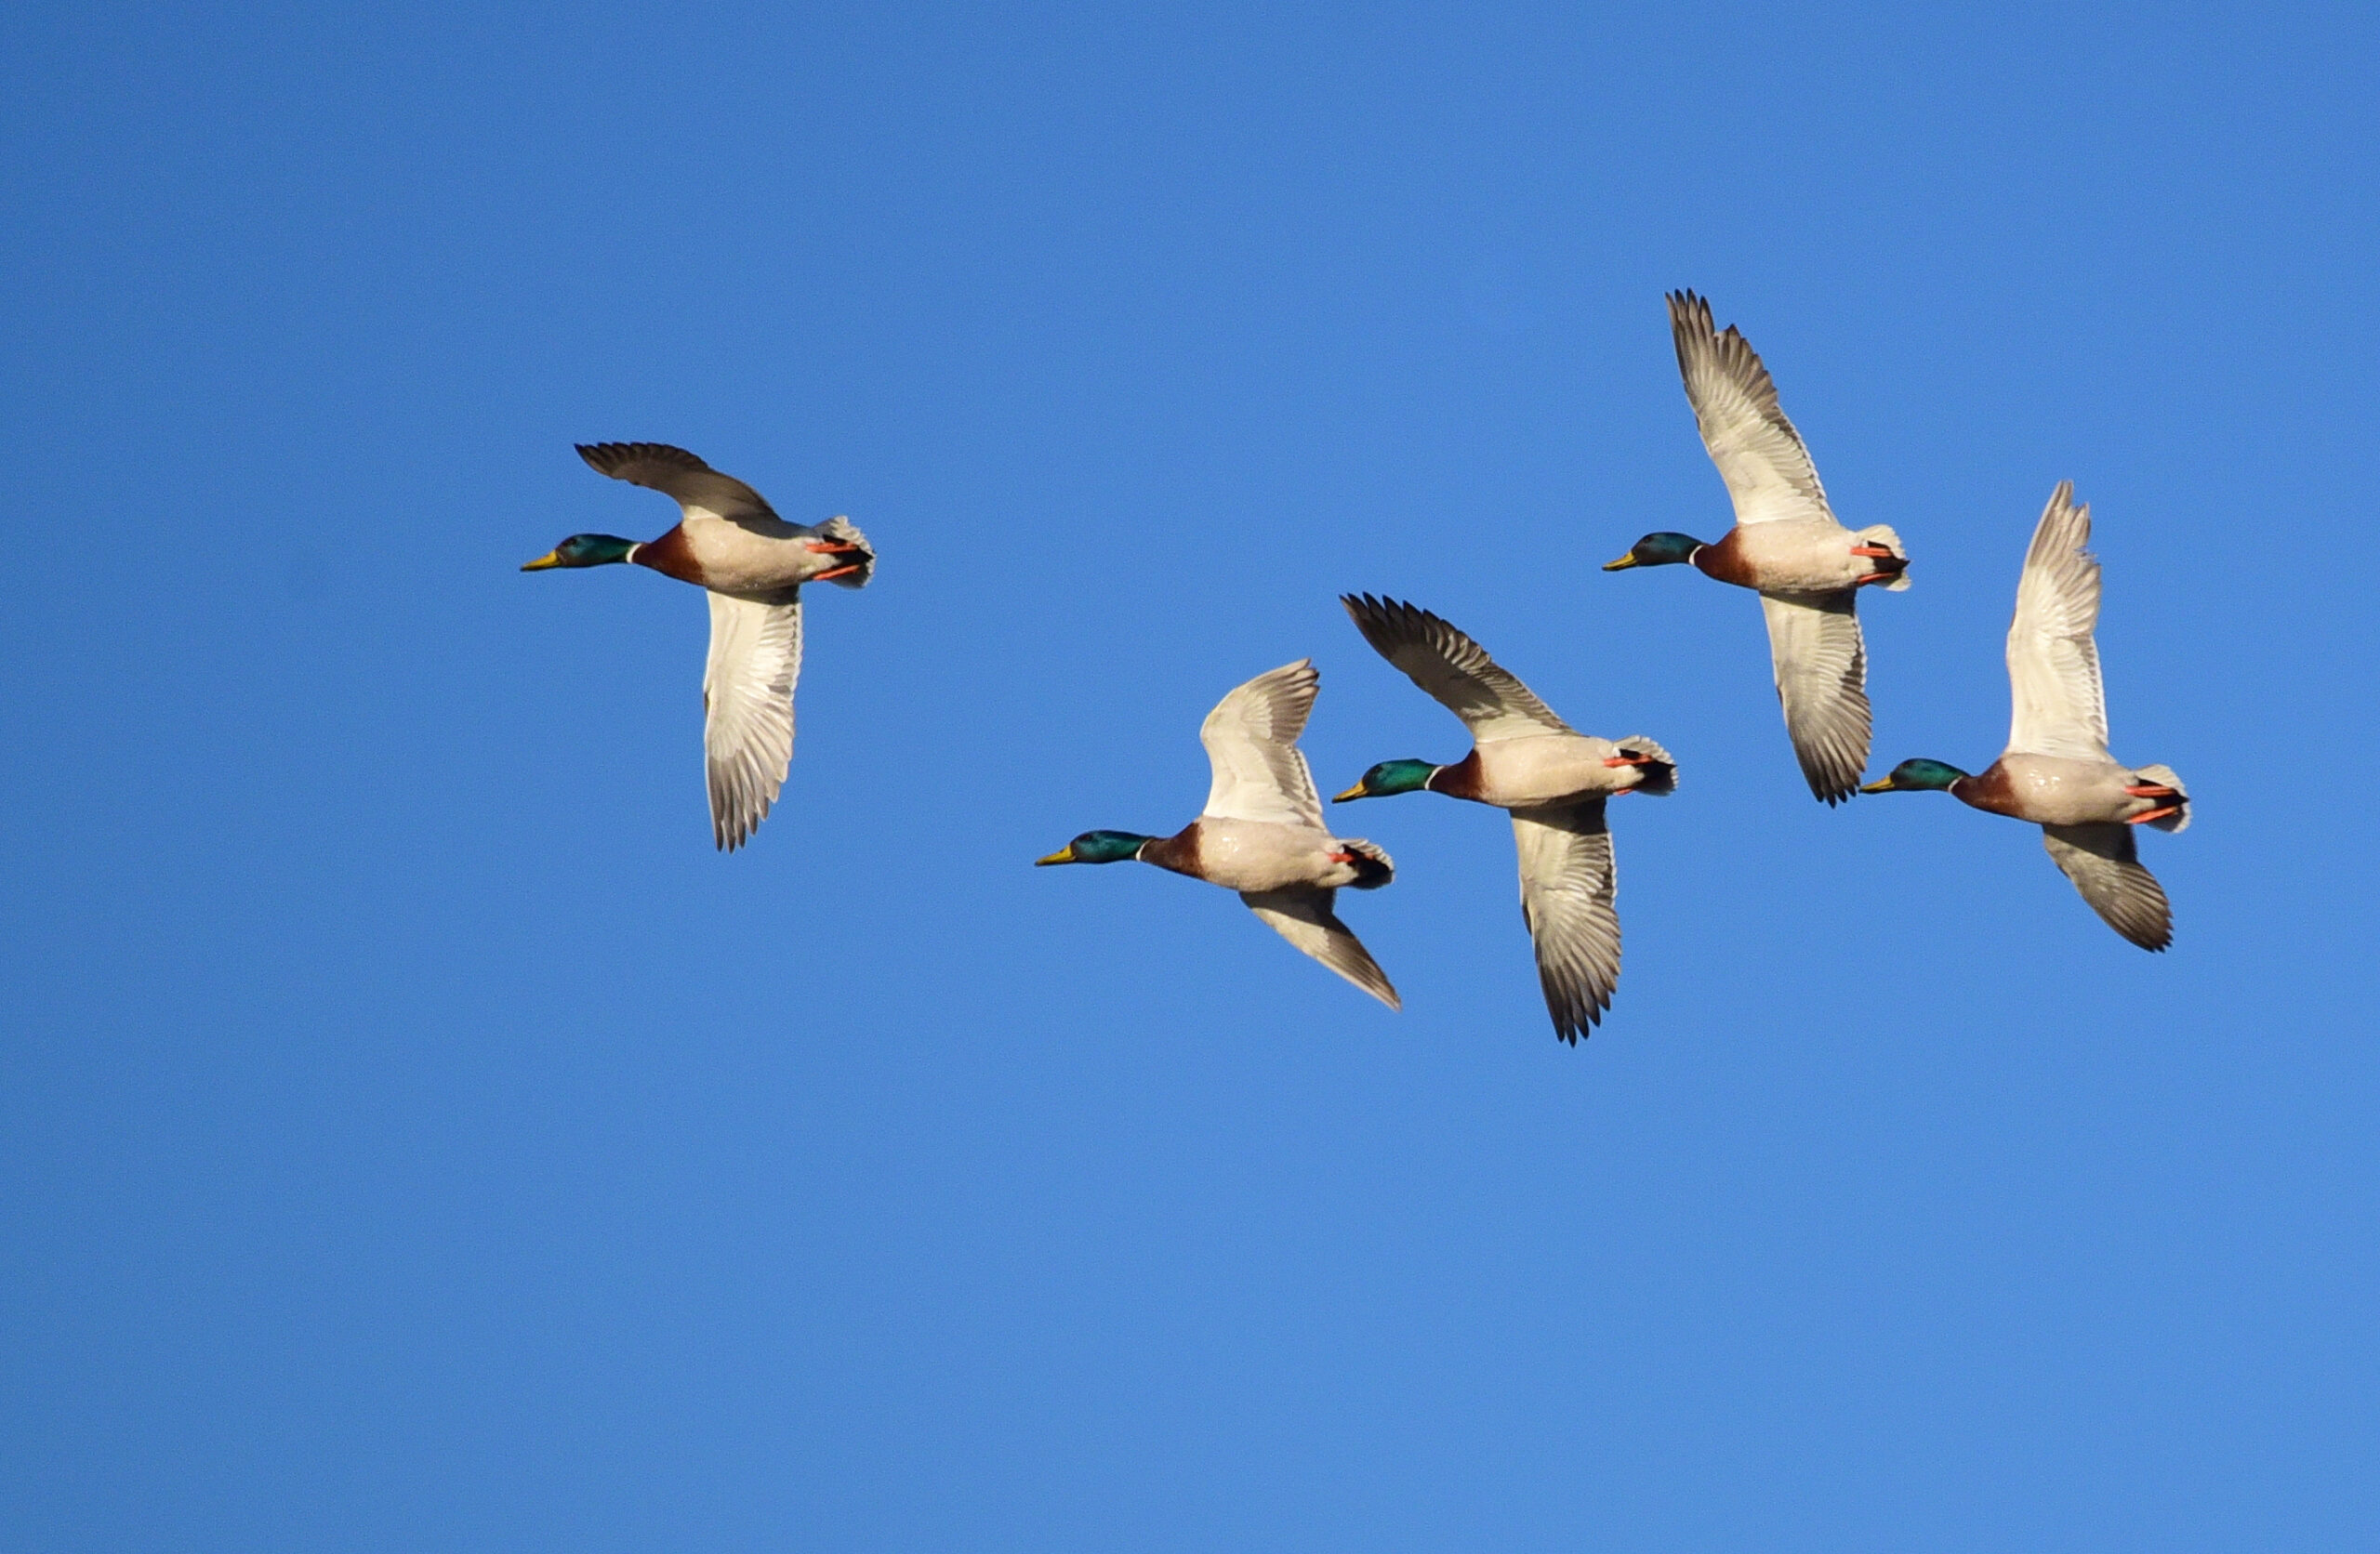 Are Duck Hunters Really Losing 1 in 5 Birds? Here's How We Can Do Better